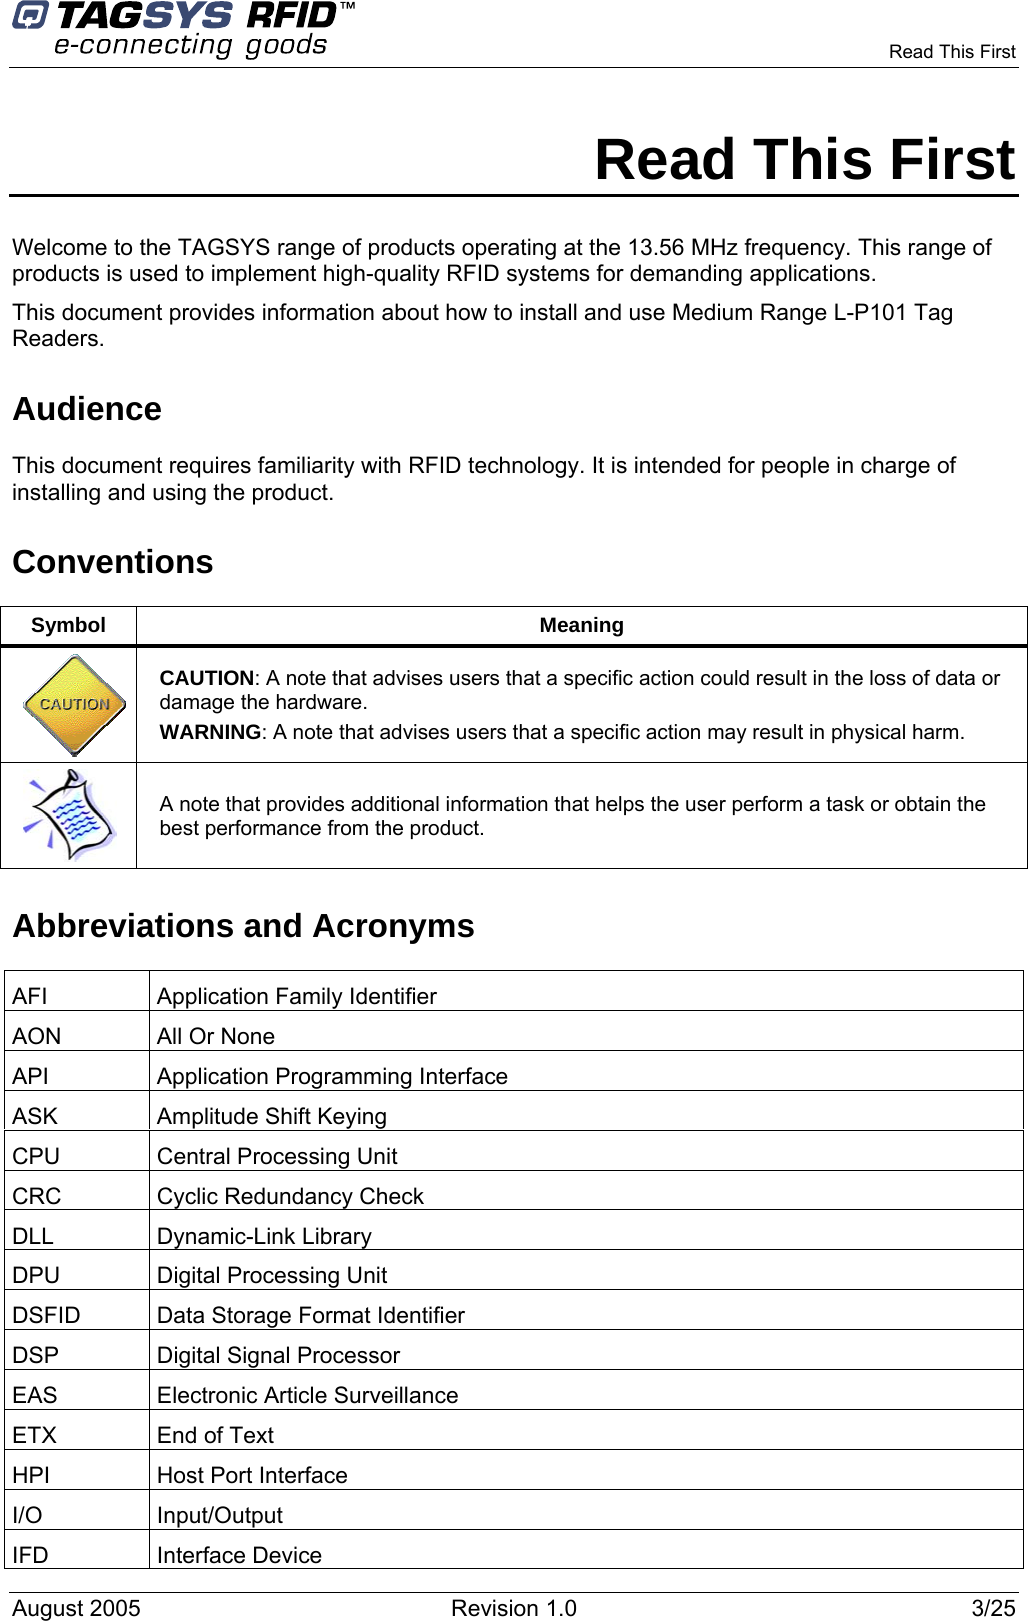      Read This First    Read This First Welcome to the TAGSYS range of products operating at the 13.56 MHz frequency. This range of products is used to implement high-quality RFID systems for demanding applications. This document provides information about how to install and use Medium Range L-P101 Tag Readers.  Audience This document requires familiarity with RFID technology. It is intended for people in charge of installing and using the product. Conventions Symbol Meaning  CAUTION: A note that advises users that a specific action could result in the loss of data or damage the hardware. WARNING: A note that advises users that a specific action may result in physical harm.   A note that provides additional information that helps the user perform a task or obtain the best performance from the product. Abbreviations and Acronyms AFI Application Family Identifier AON  All Or None API Application Programming Interface ASK  Amplitude Shift Keying CPU  Central Processing Unit CRC  Cyclic Redundancy Check DLL Dynamic-Link Library DPU  Digital Processing Unit DSFID  Data Storage Format Identifier DSP  Digital Signal Processor EAS  Electronic Article Surveillance ETX  End of Text HPI  Host Port Interface I/O Input/Output IFD Interface Device August 2005  Revision 1.0  3/25   